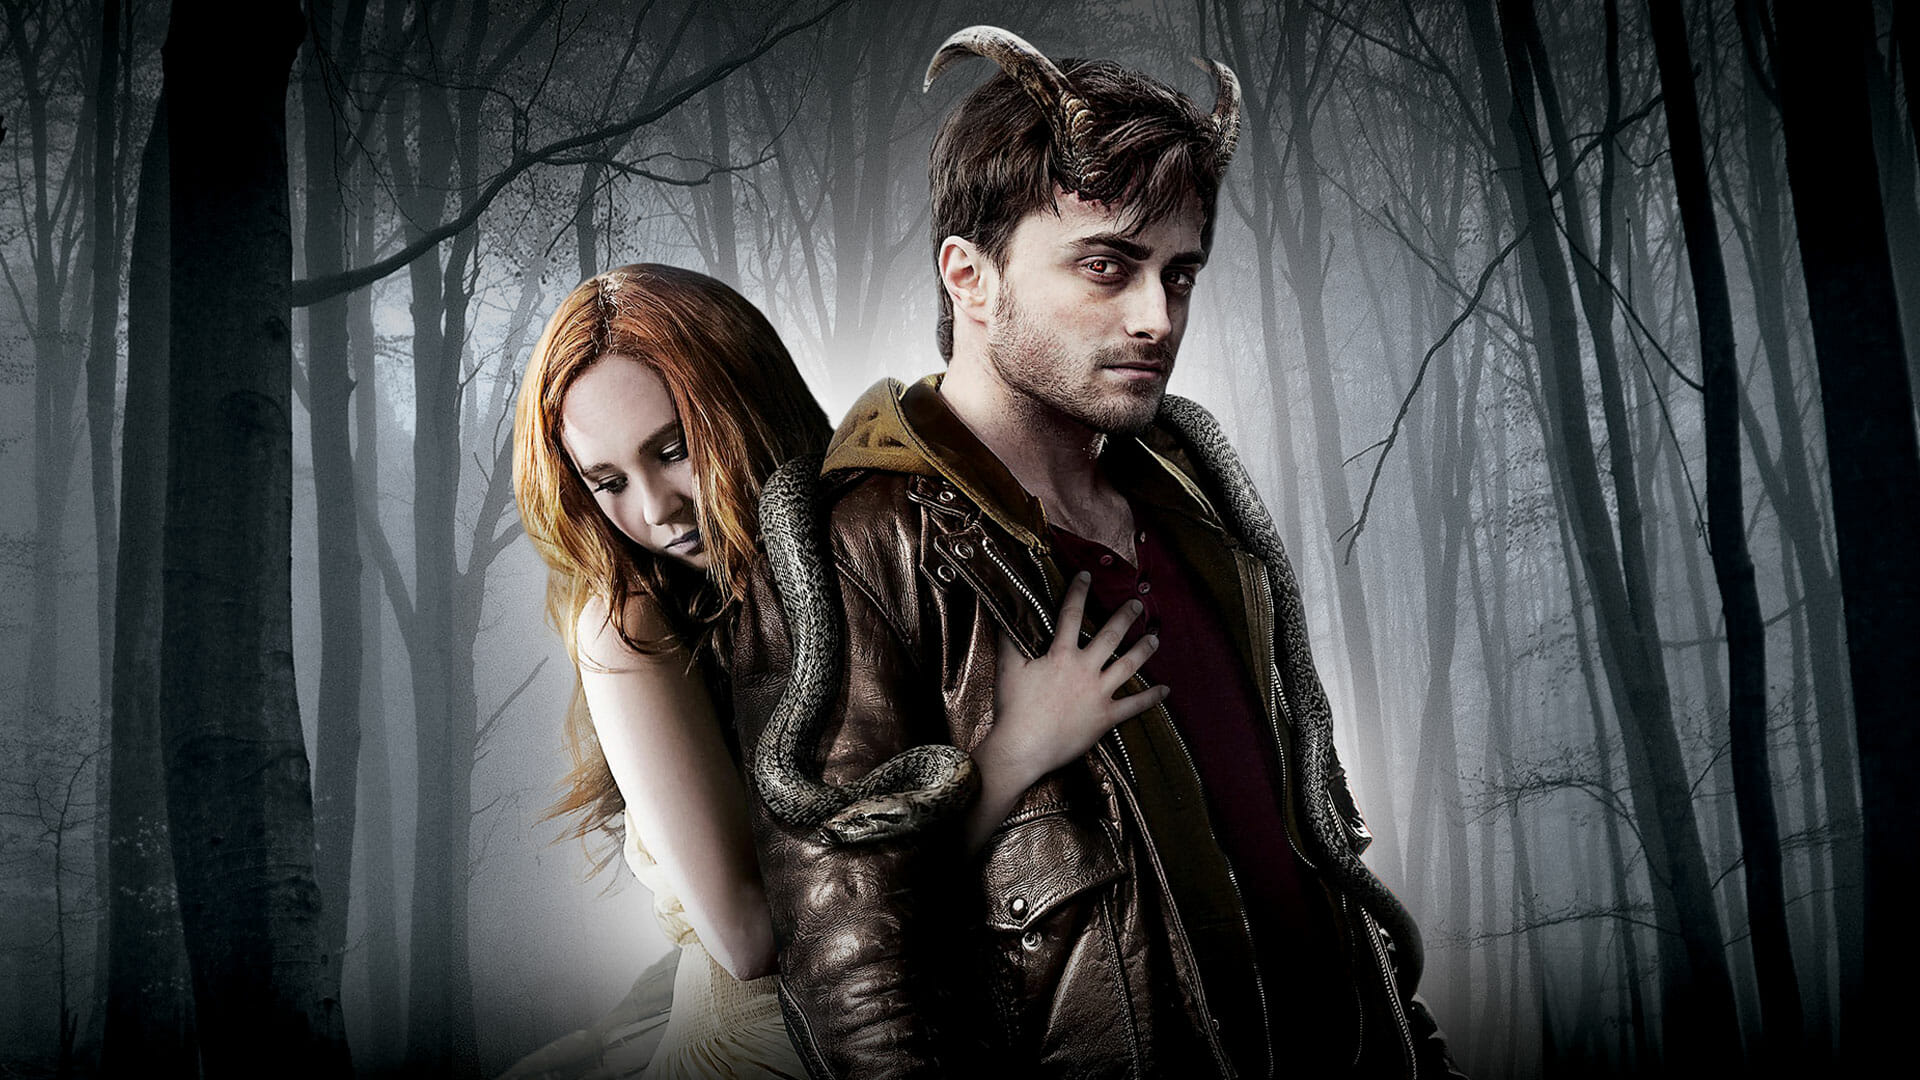 Best Horror Movies on Amazon Prime: Horns (2013)